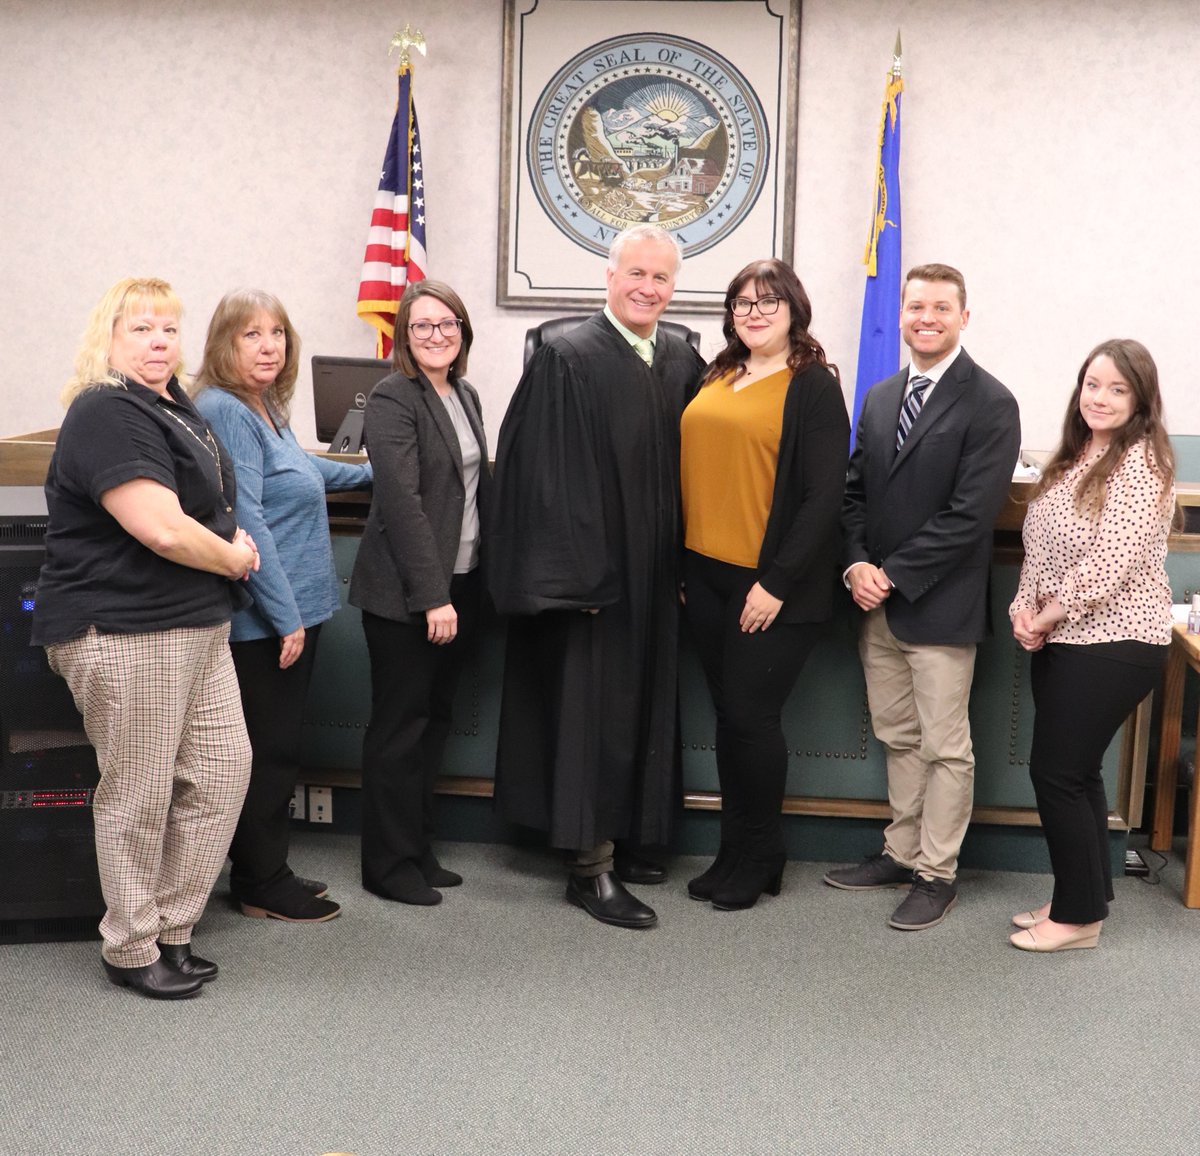 The next installment in our series on county departments and their responsibilities: 10th District Court. churchillcountynv.gov/CivicAlerts.as… #ChurchillCounty #ChurchillCountyNv